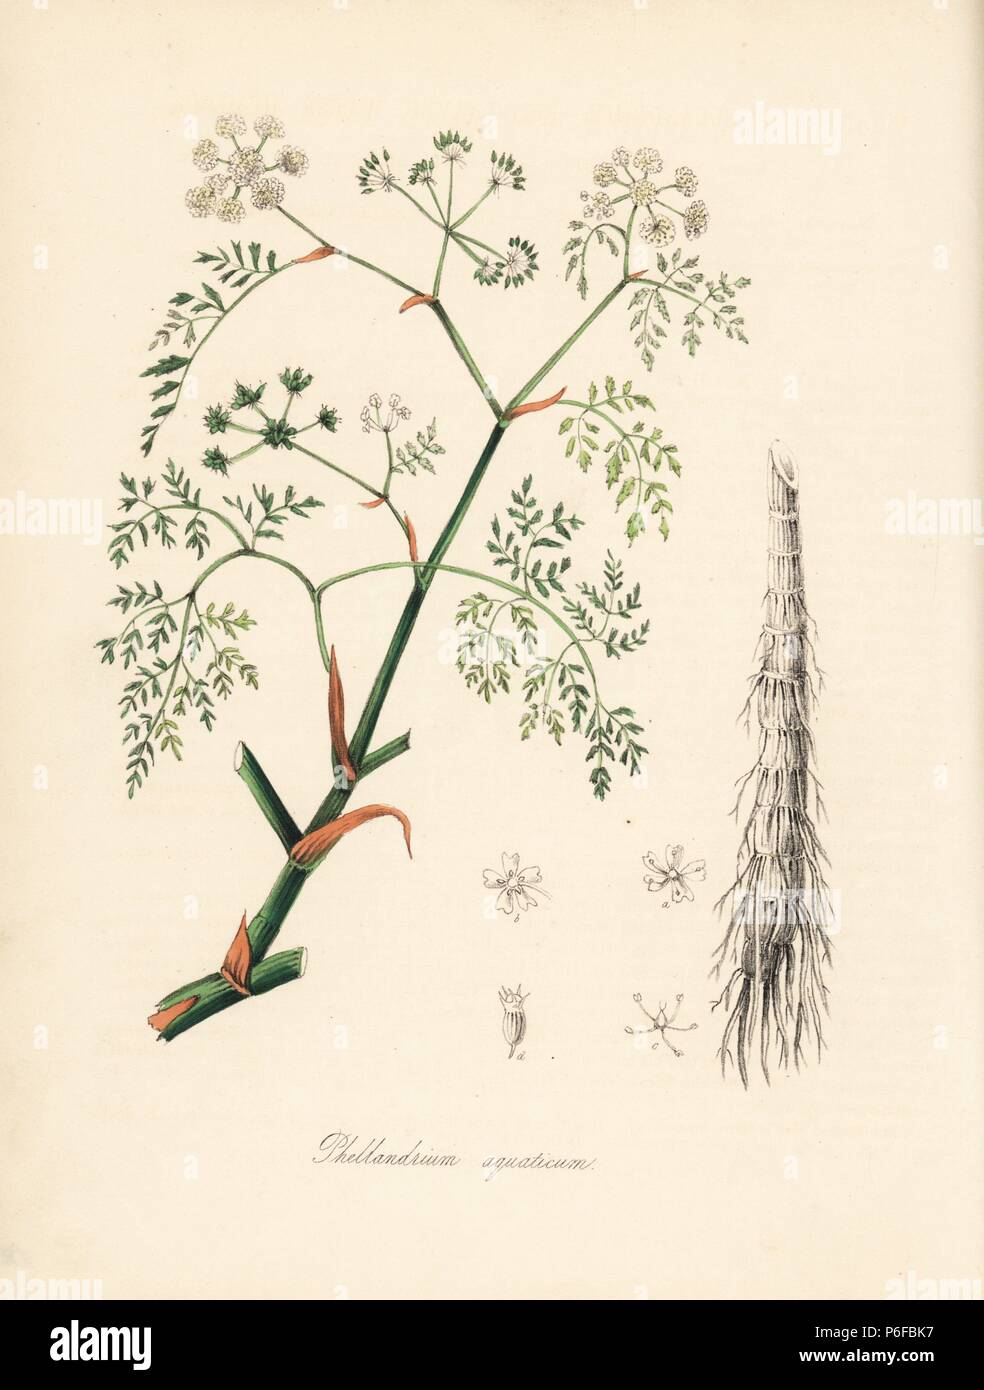 Fine-leaved water dropwort, Oenanthe aquatica (Fine-leaved water hemlock, Oenanthe phellandrium). Handcoloured zincograph by C. Chabot drawn by Miss M. A. Burnett from her 'Plantae Utiliores: or Illustrations of Useful Plants,' Whittaker, London, 1842. Miss Burnett drew the botanical illustrations, but the text was chiefly by her late brother, British botanist Gilbert Thomas Burnett (1800-1835). Stock Photo